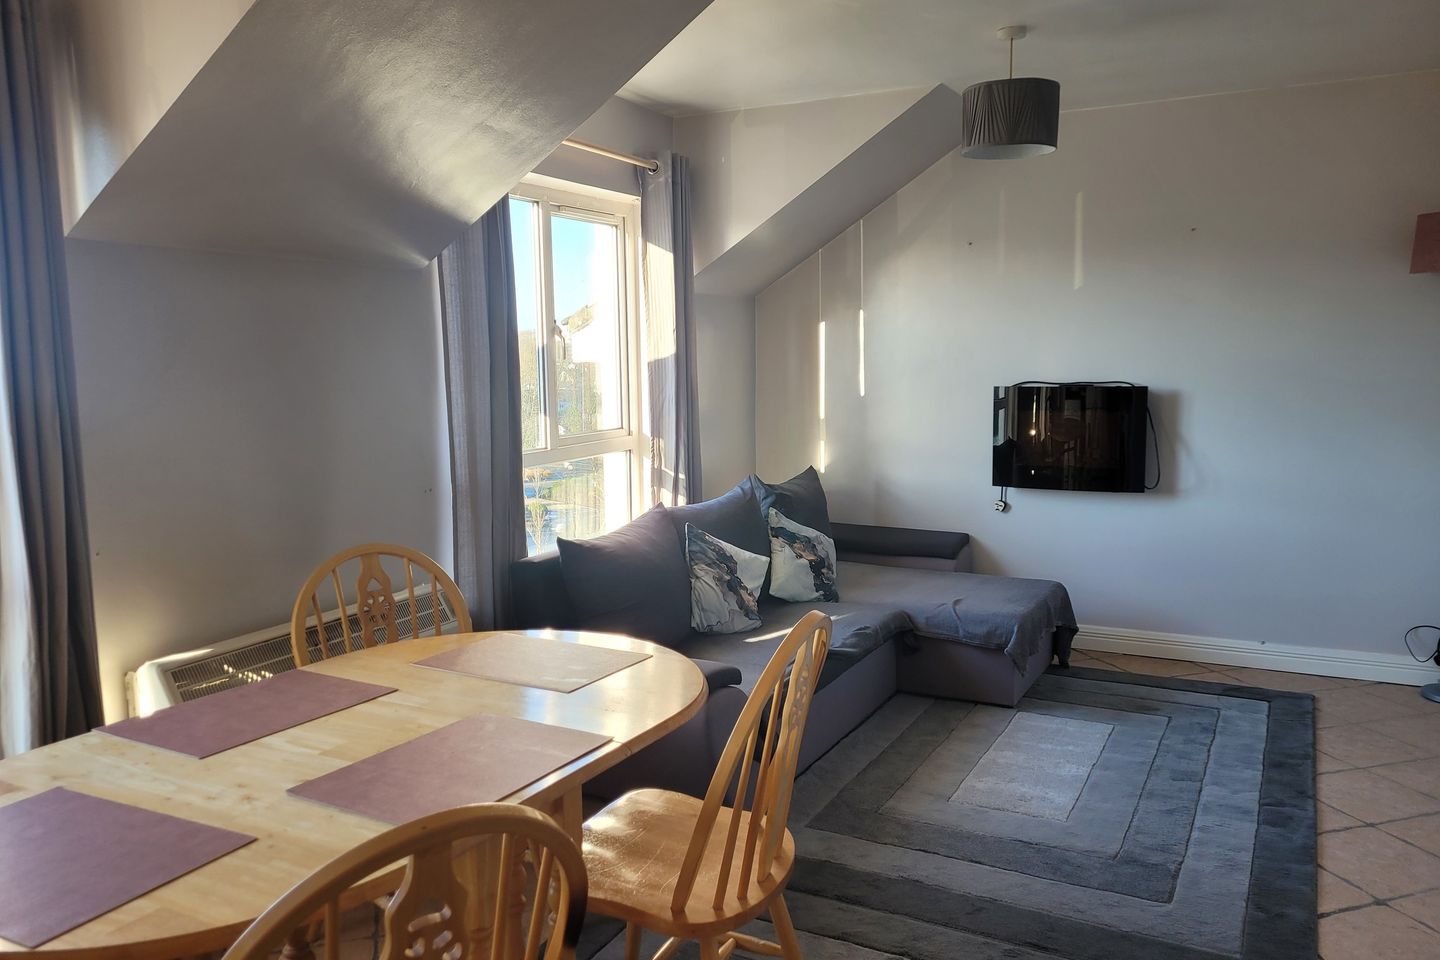 Apartment 16, Lisdonagh, Galway City, Co. Galway